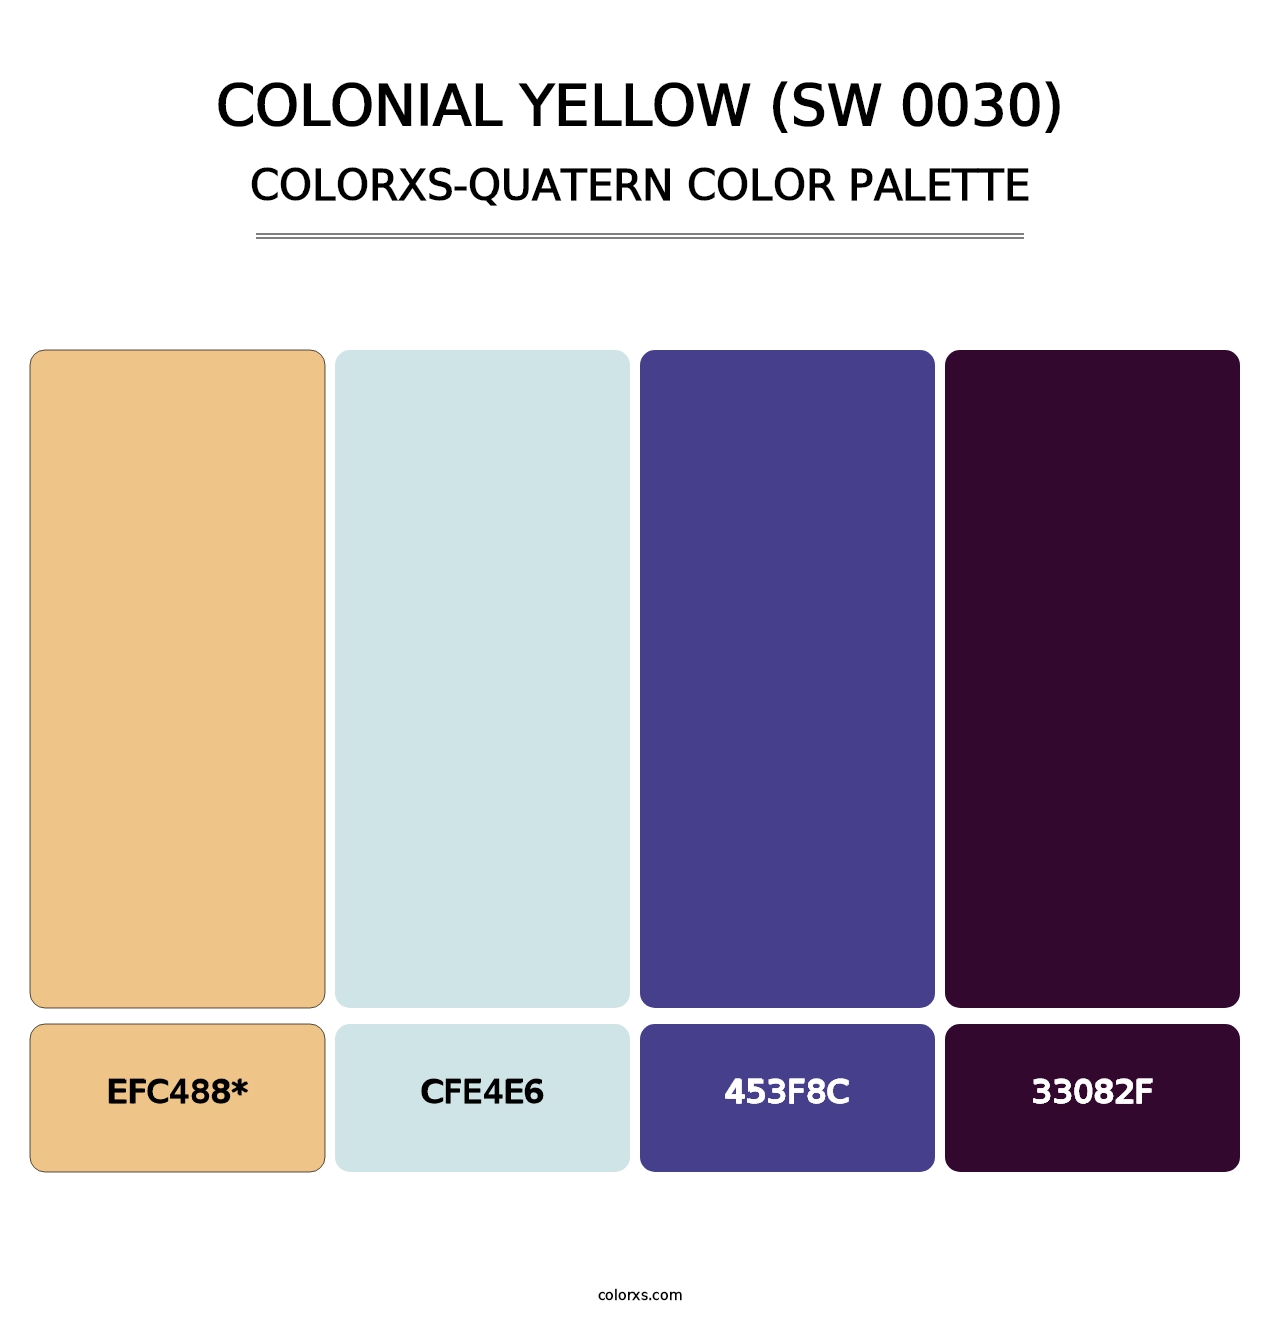 Colonial Yellow (SW 0030) - Colorxs Quatern Palette